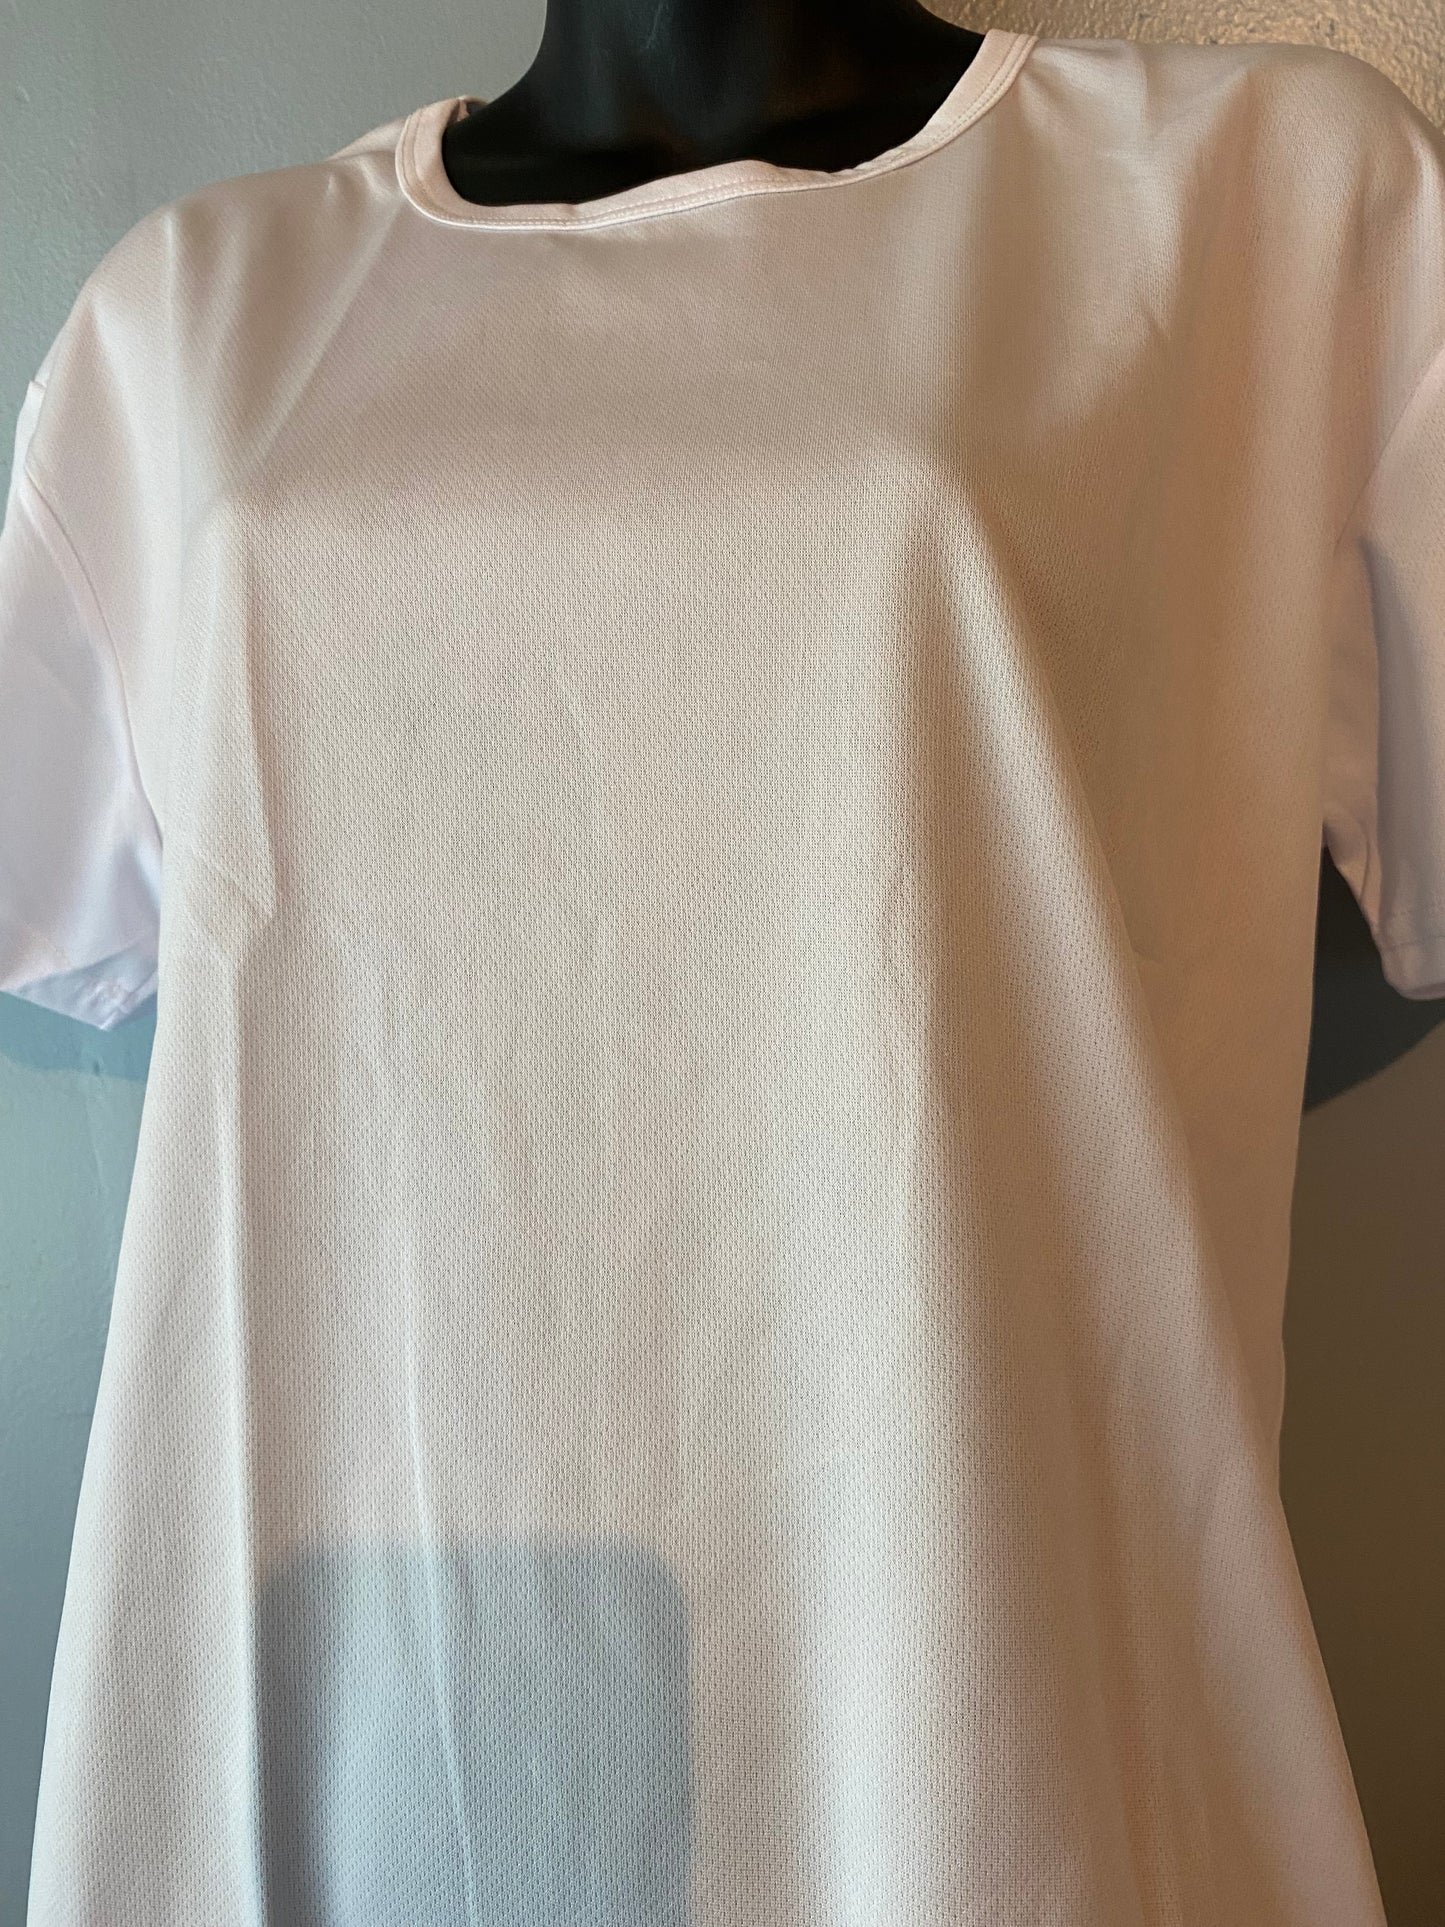 DIY - Ladies Tees - Safe for Sublimation